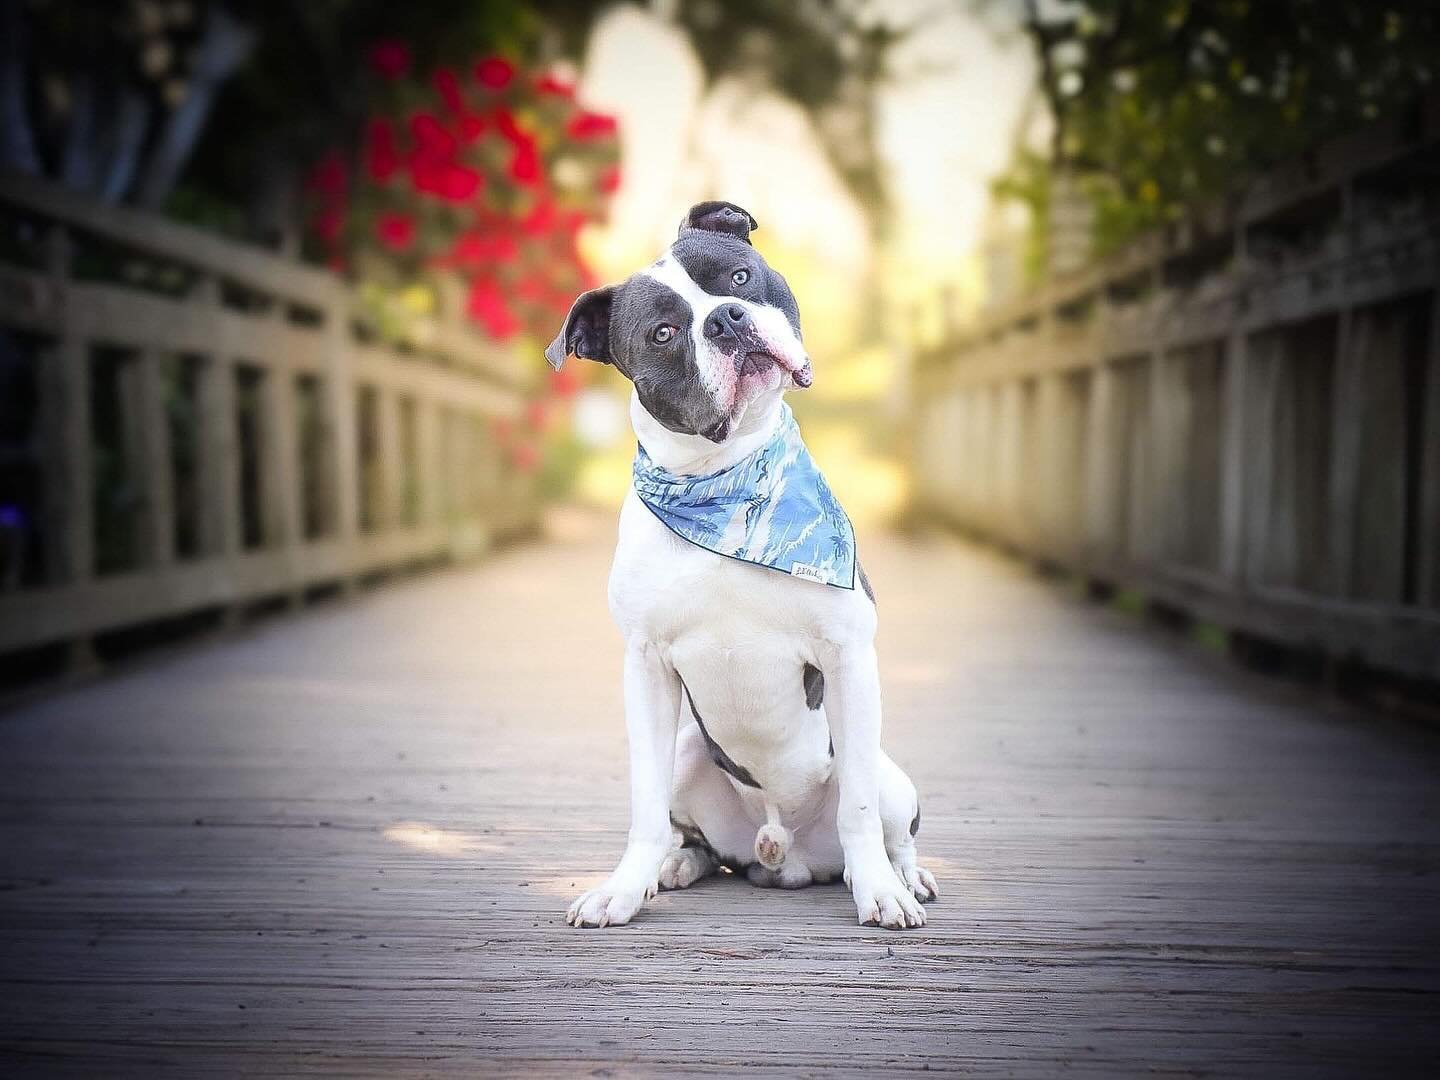 Ladies and gentlemen, here is our big head bigger heart boy Kenny&rsquo;s first photo shoot!!! 🤩😄

He was such a good boy on his first public outing/photoshoot. There were so many people and dogs around but he did marvelous for his first time being